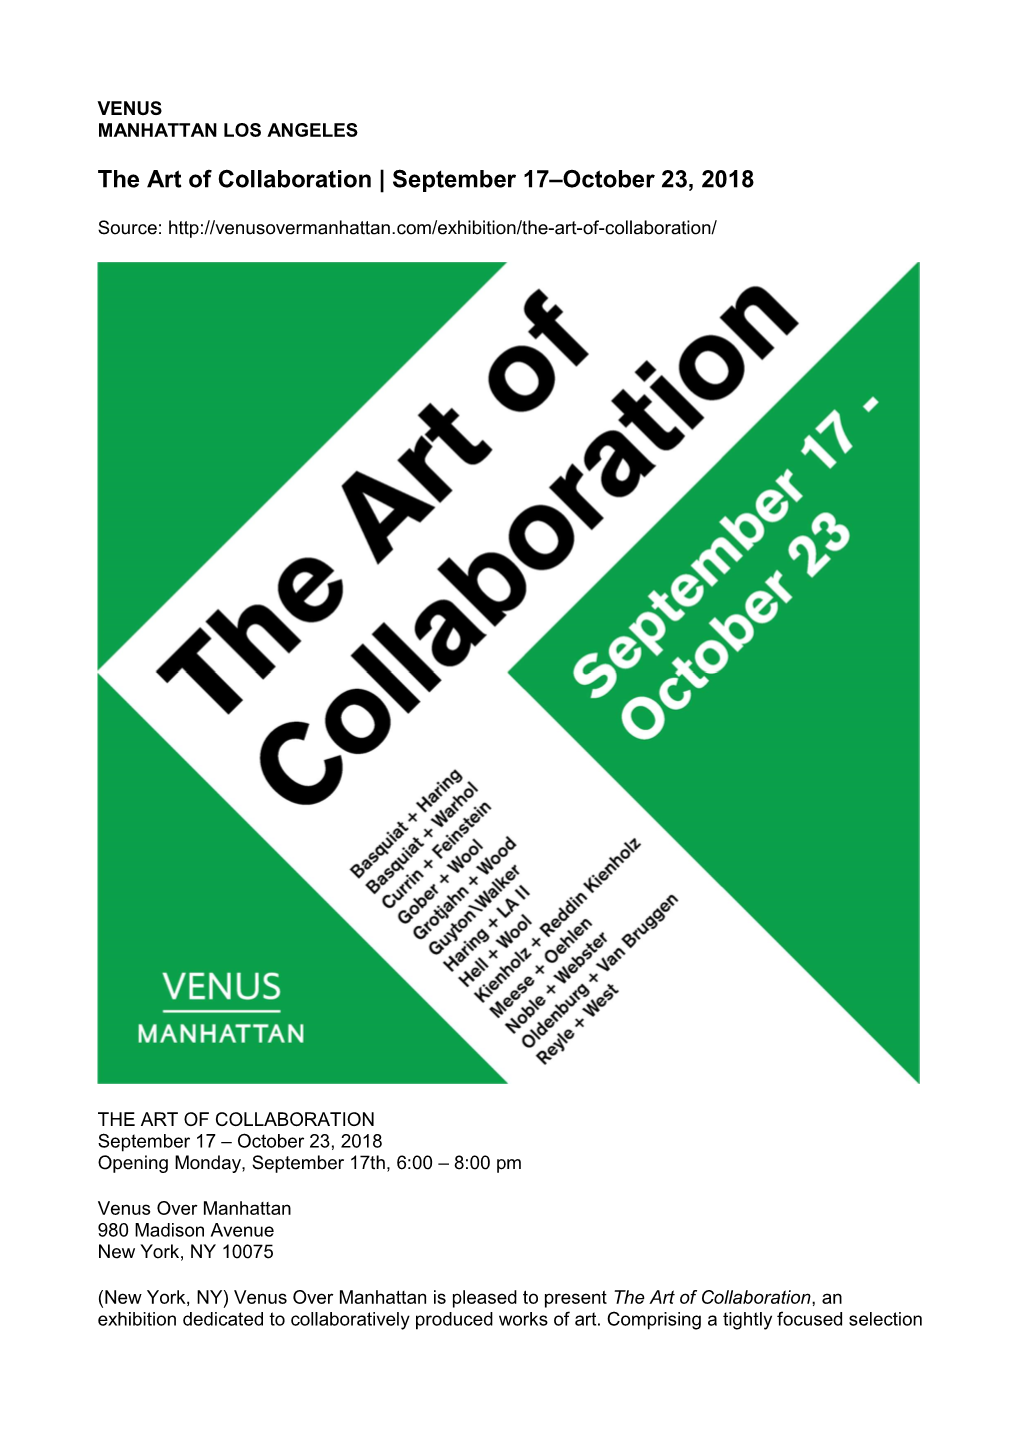 The Art of Collaboration | September 17–October 23, 2018